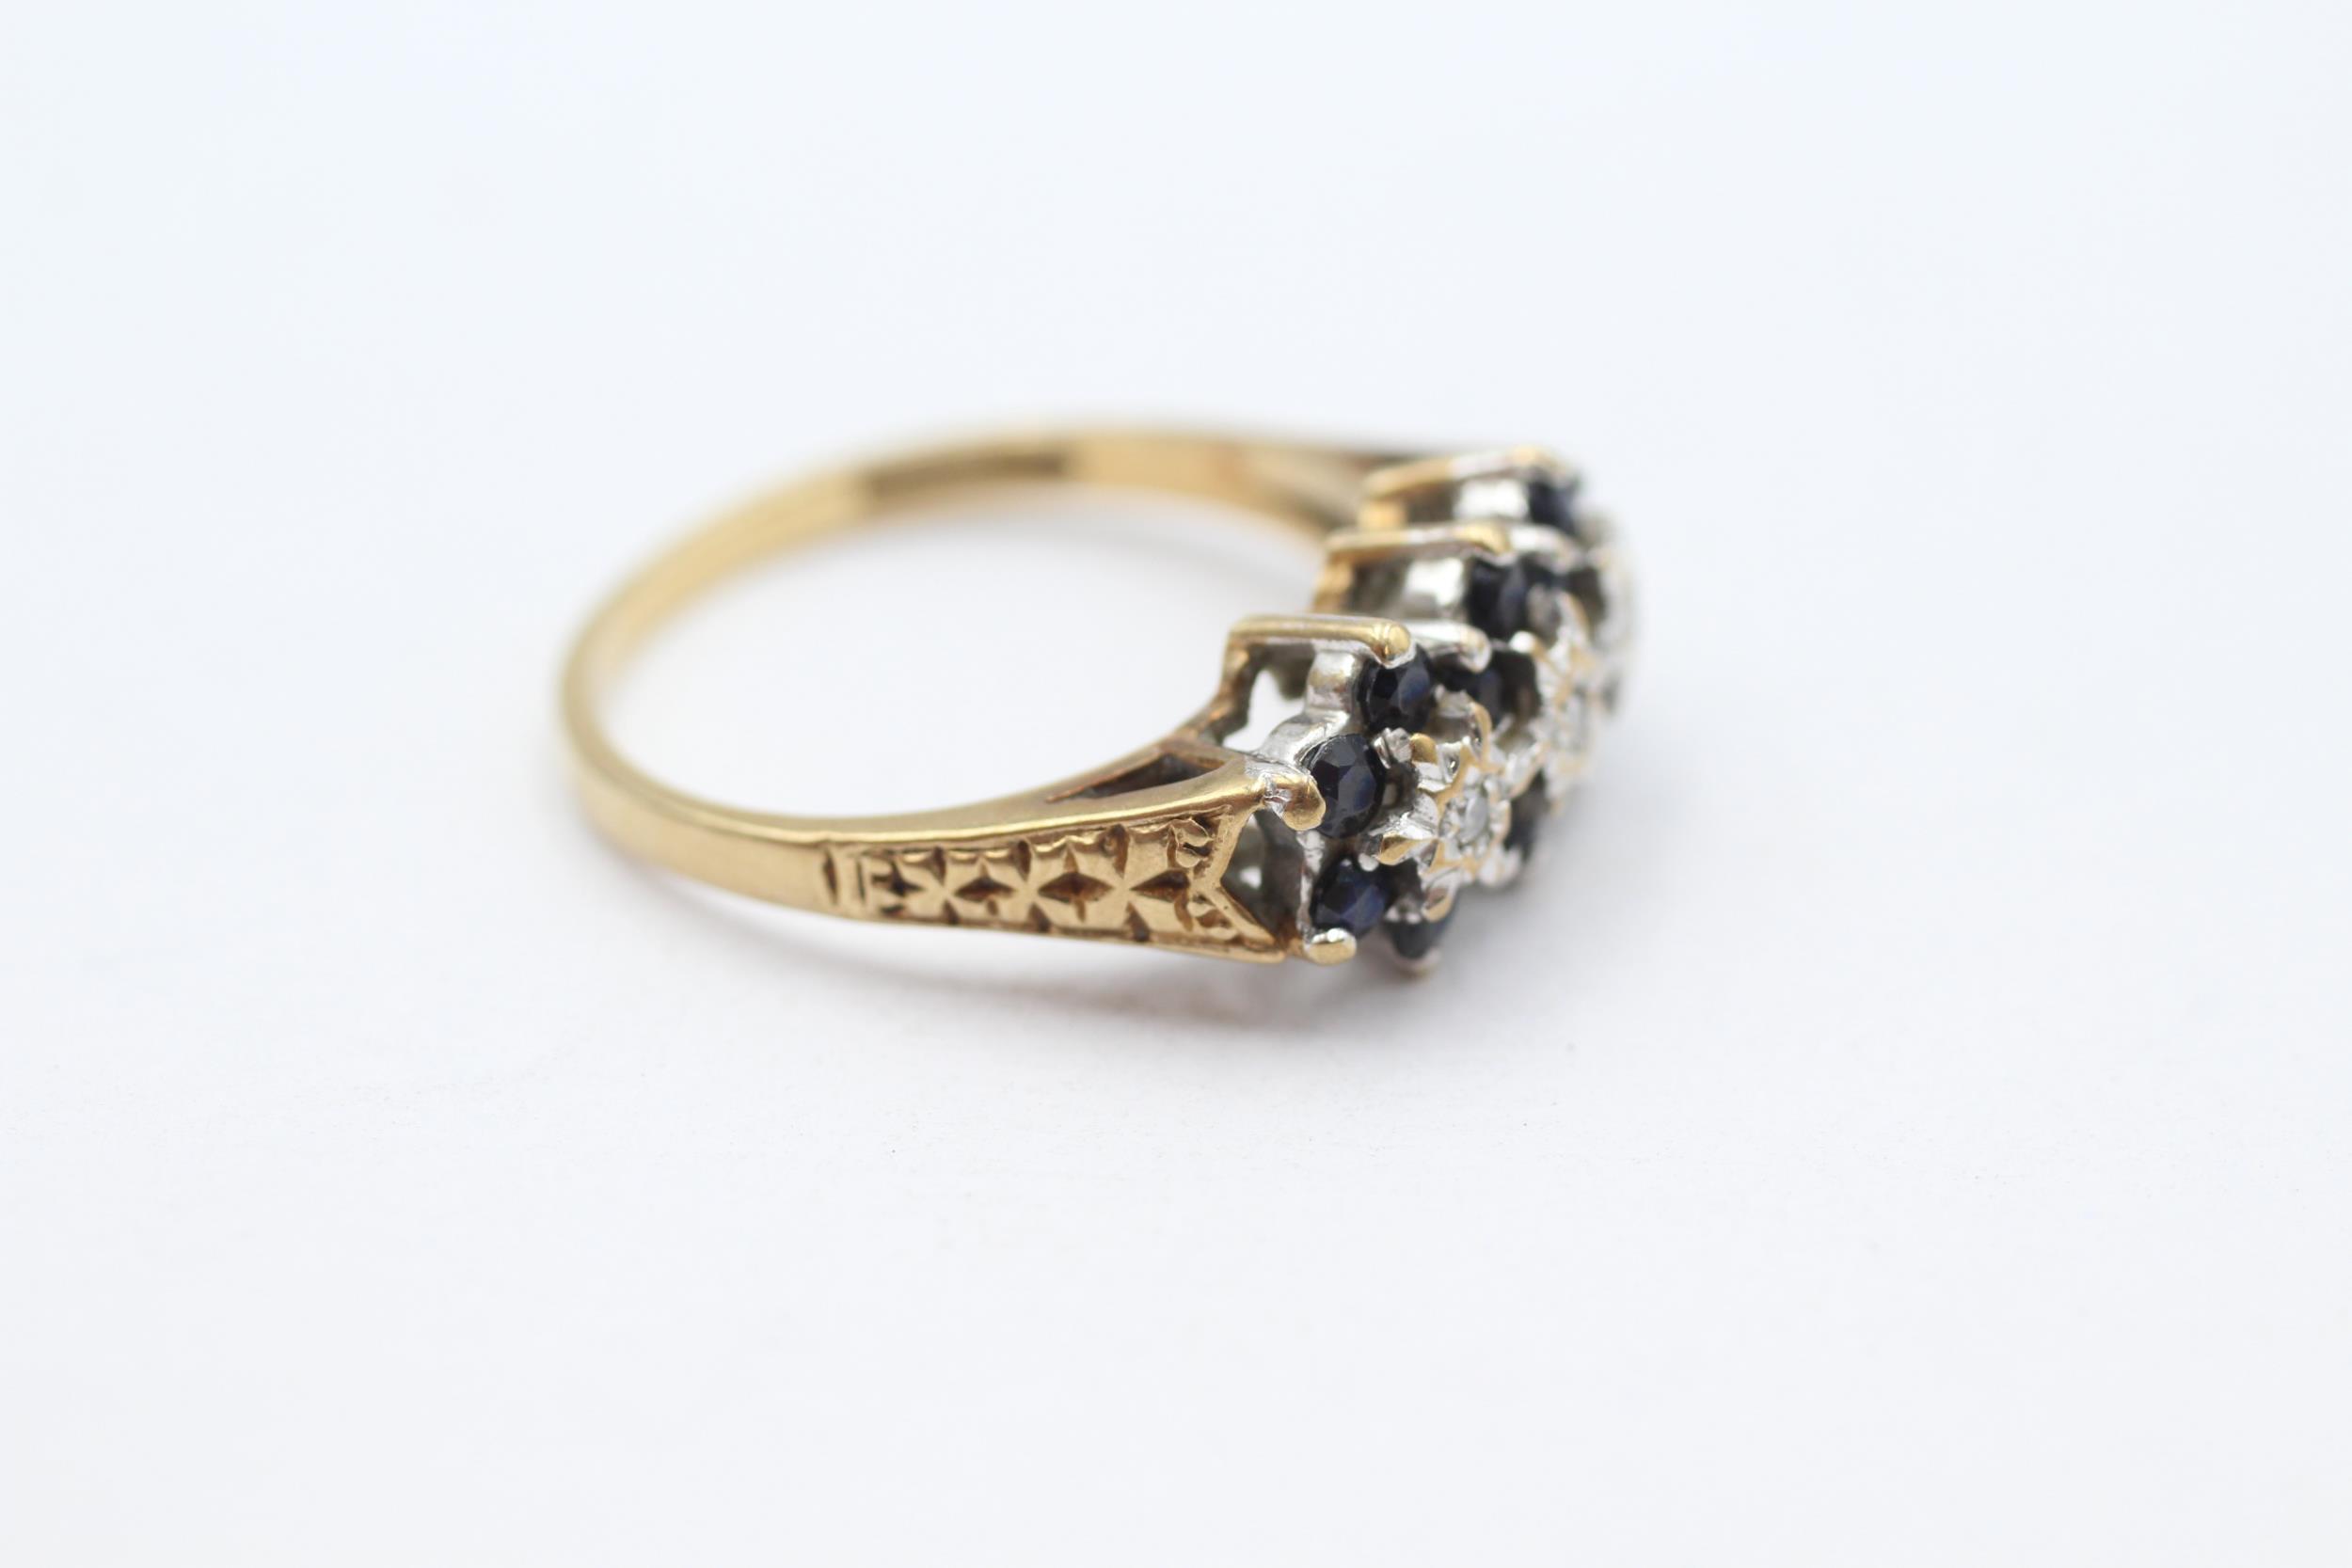 9ct gold vintage sapphire & diamond dress ring with patterned shoulders Size L - 2.6 g - Image 2 of 5